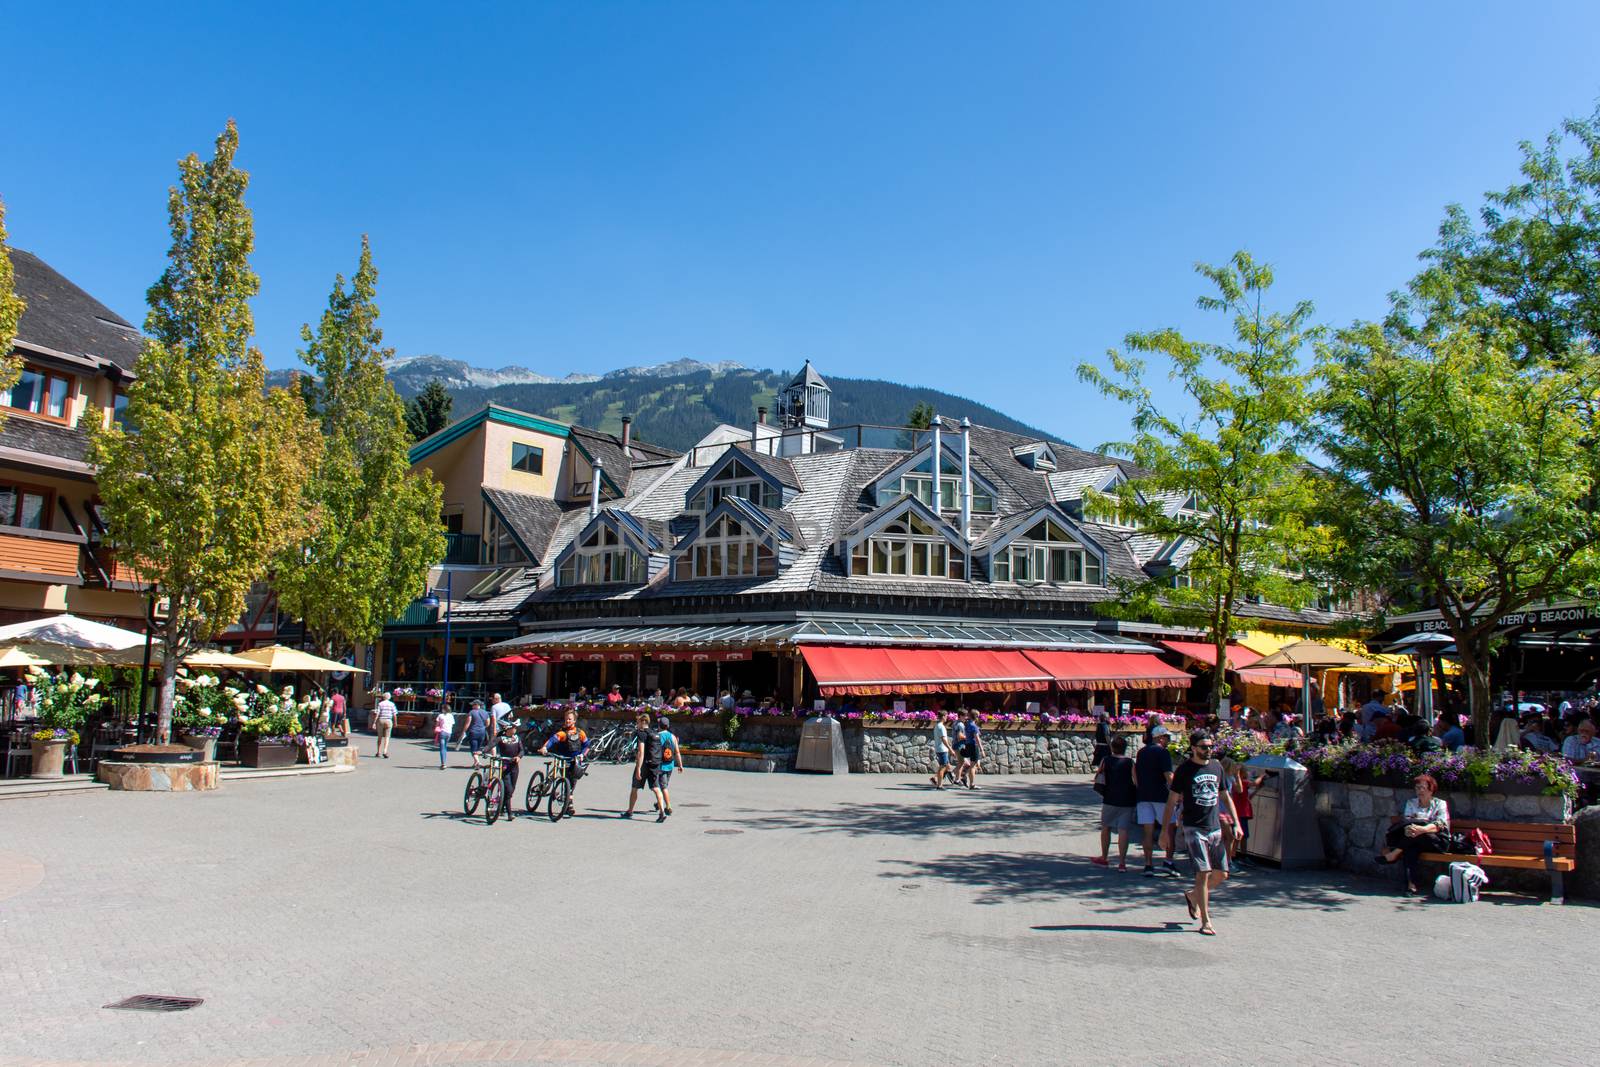 "Whistler, British Columbia/Canada - 08/07/2019: Whistler village streets during the summer looking at the walkway, street, shops and tourists and mountain bikers enjoying this Olympic world class destination."